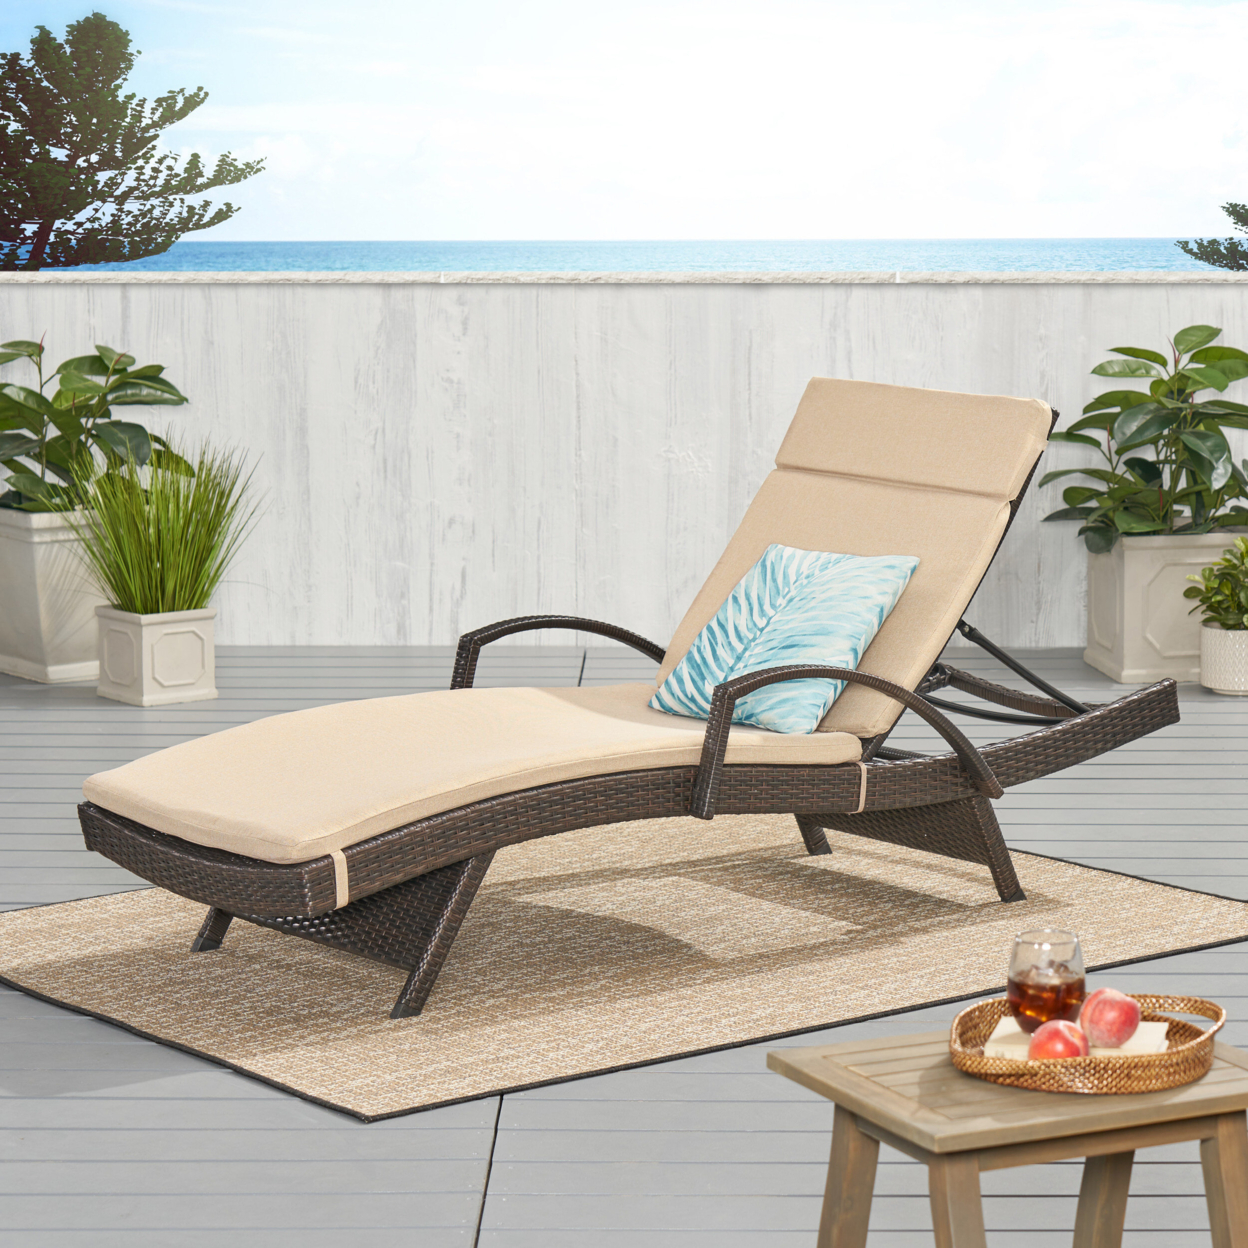 Lakeport Outdoor Adjustable Armed Chaise Lounge Chair With Cushion - Beige